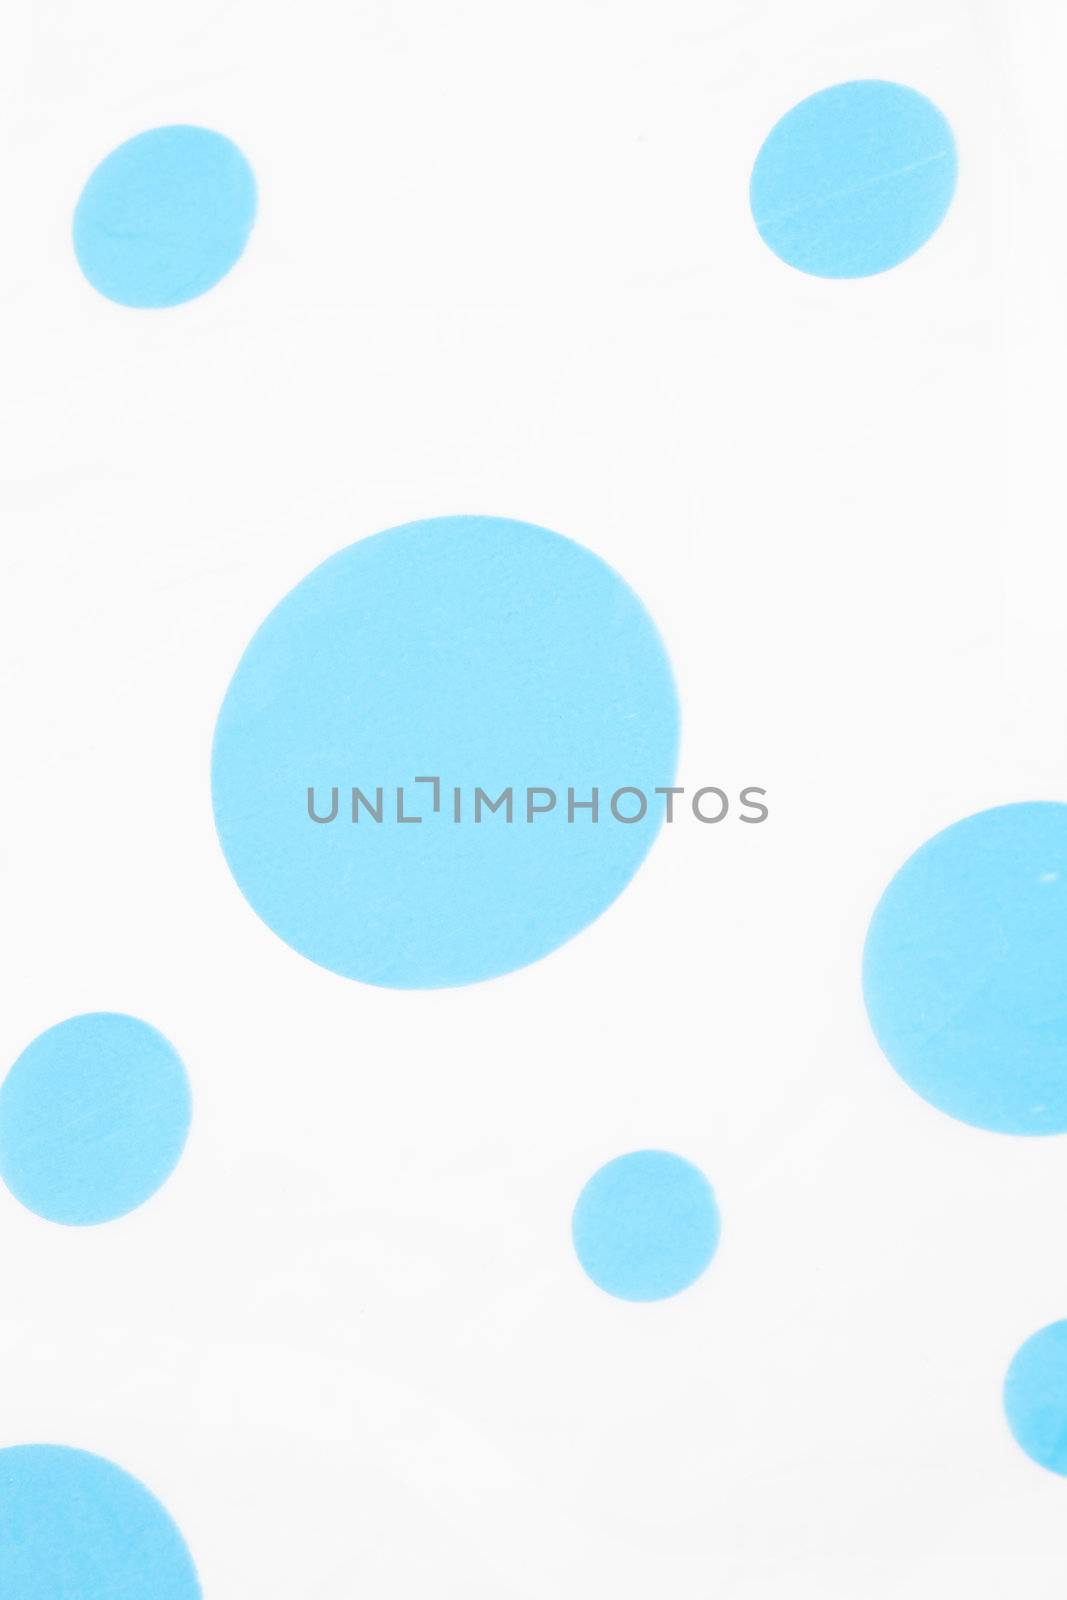 Fresh pattern of scattered blue circles by Farina6000